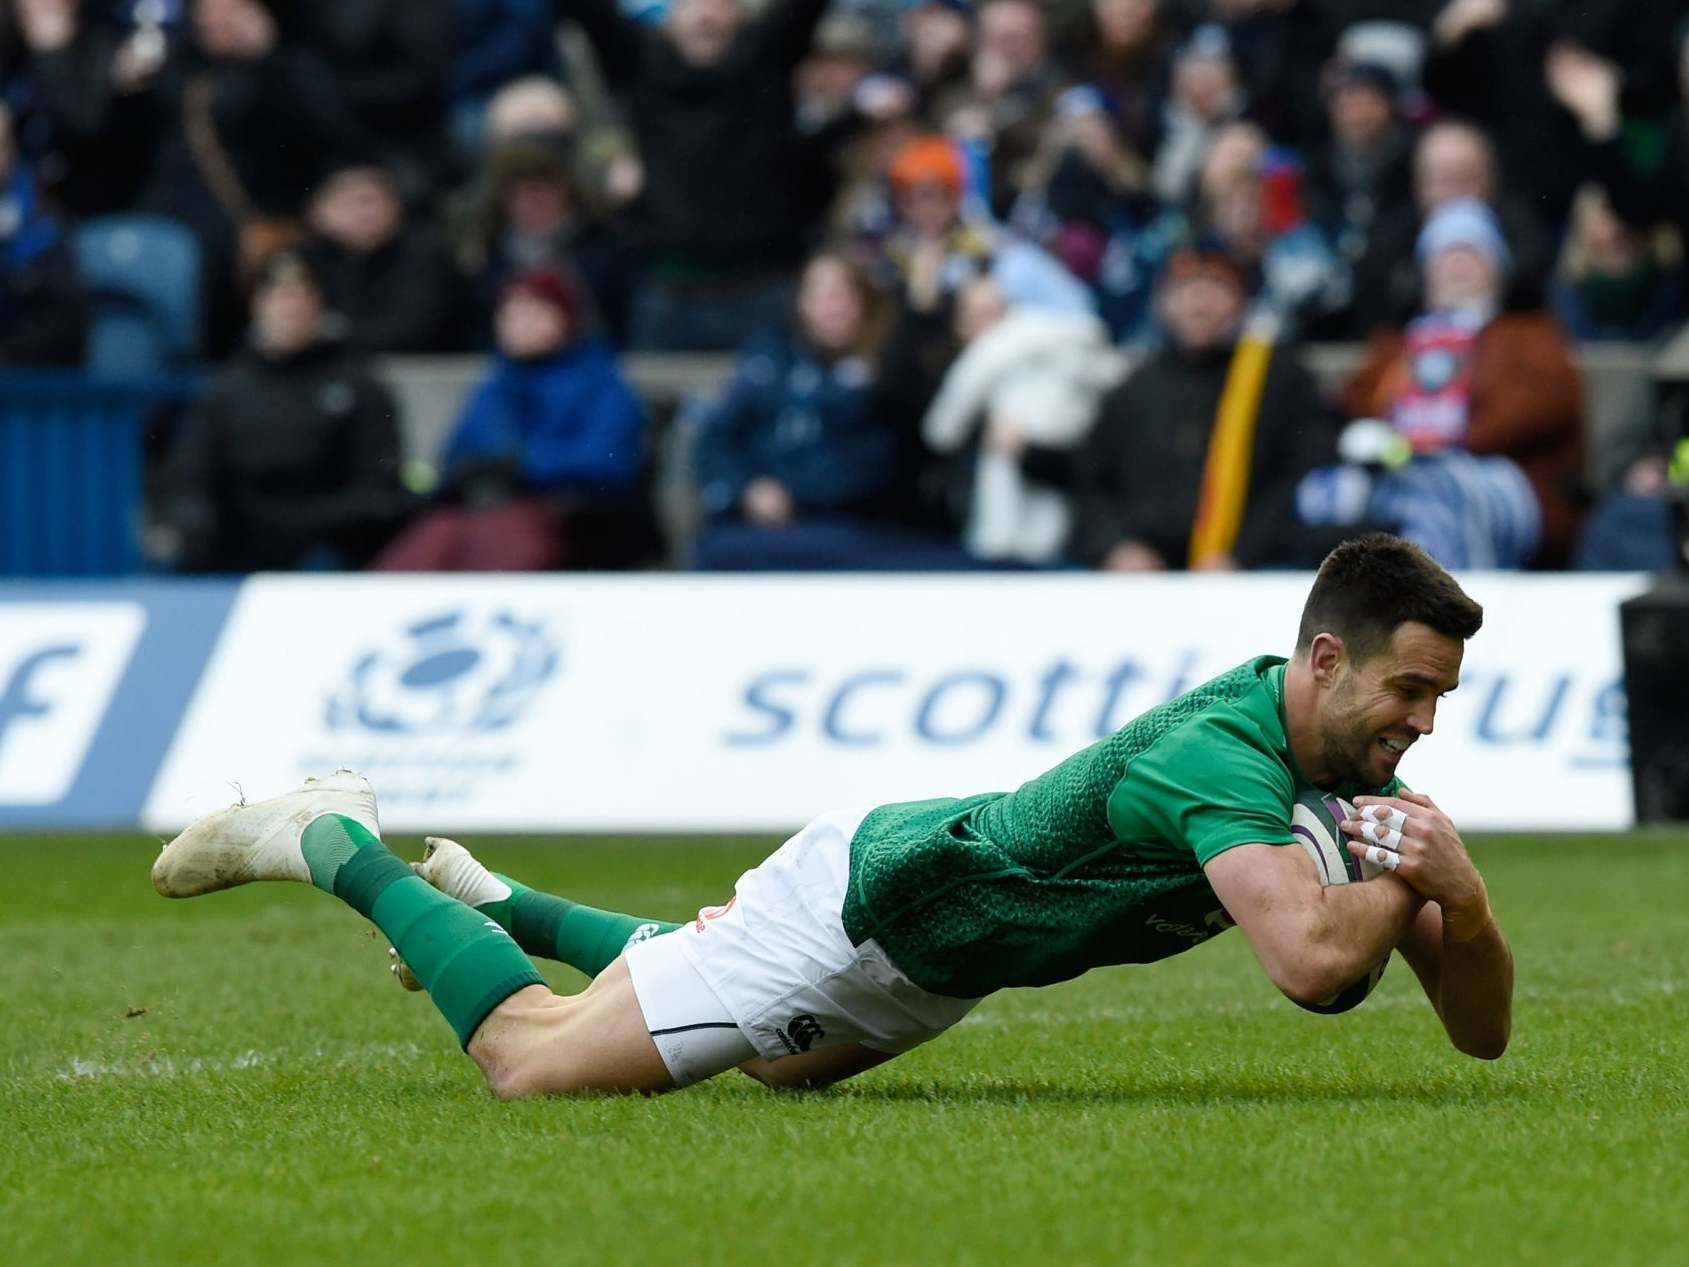 Conor Murray will start Ireland's opening Six Nations match against Scotland